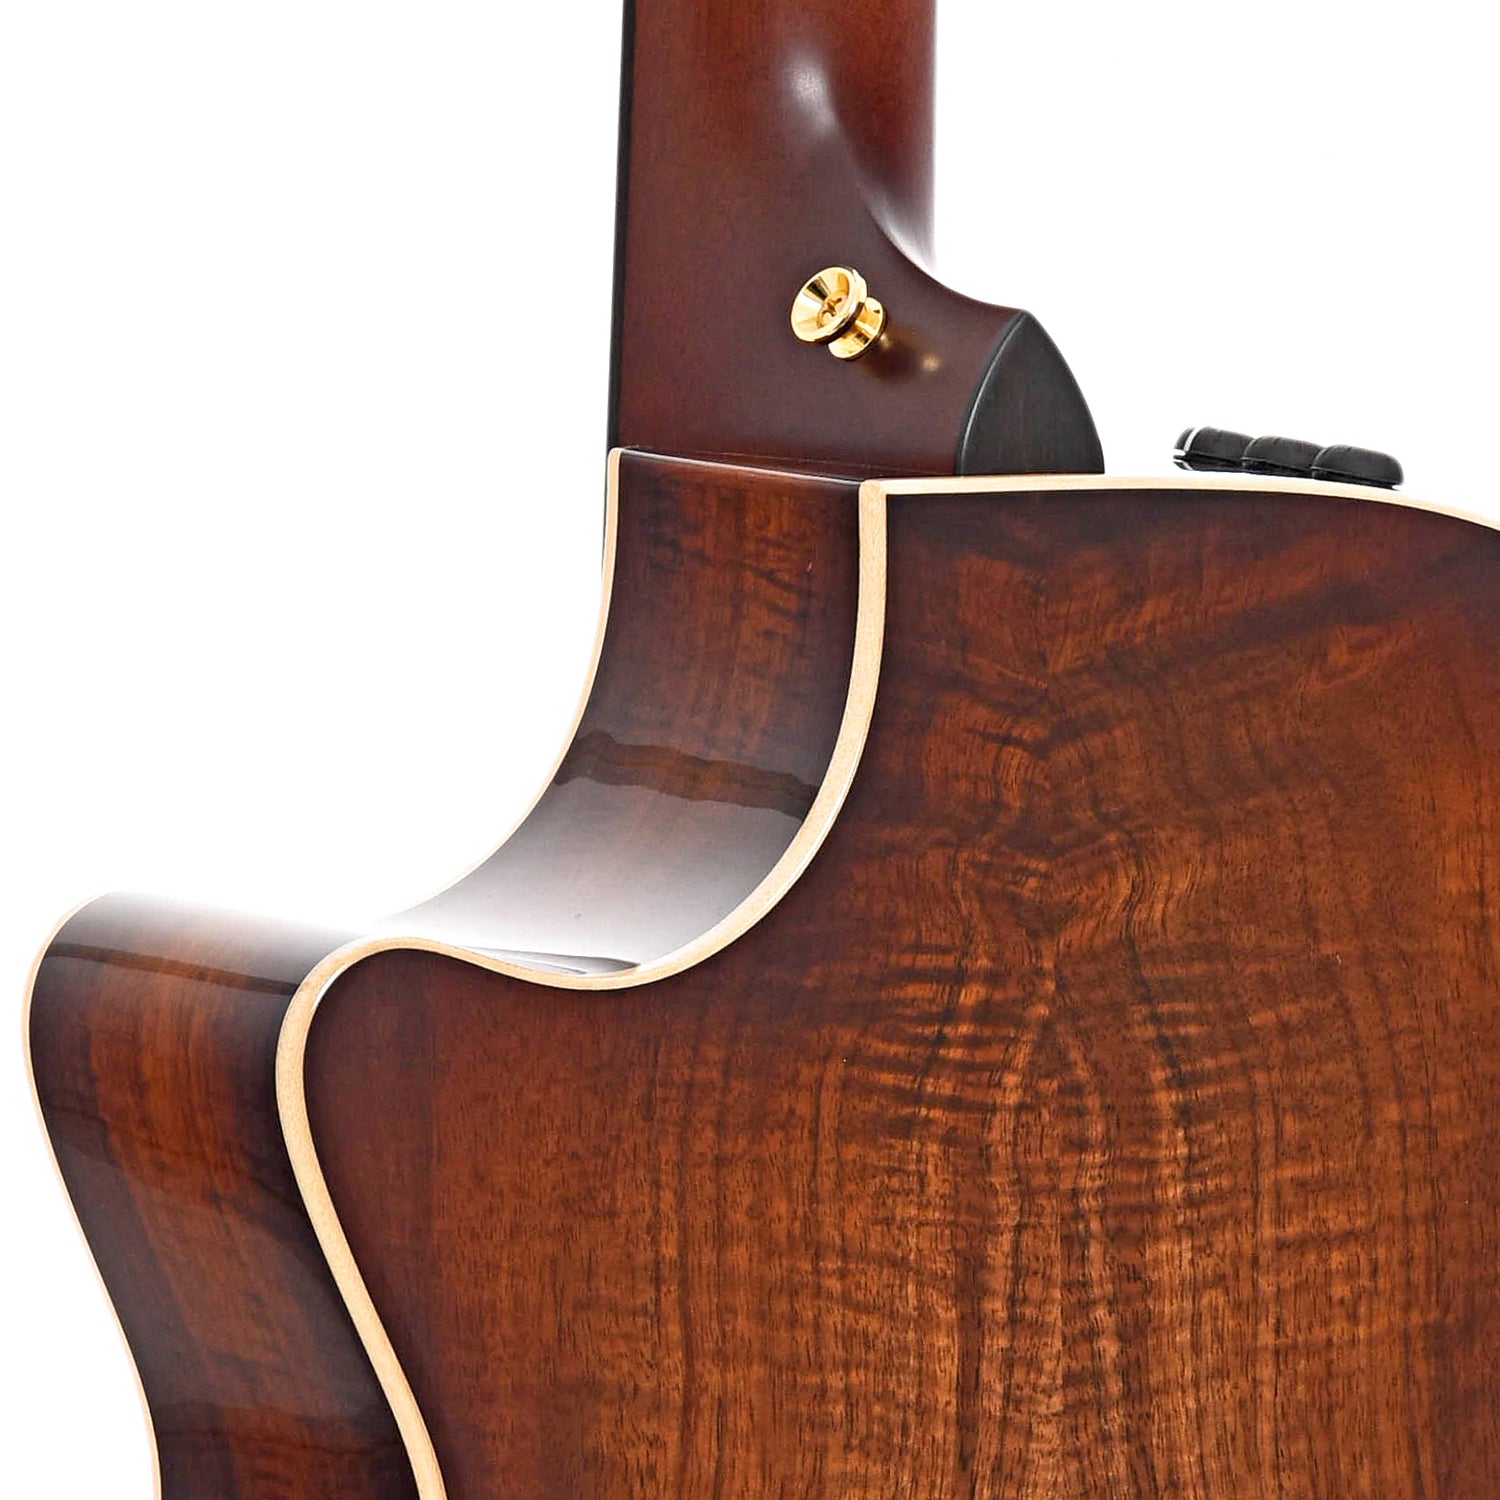 Heel of Taylor K62ce Limited Edition 12-String